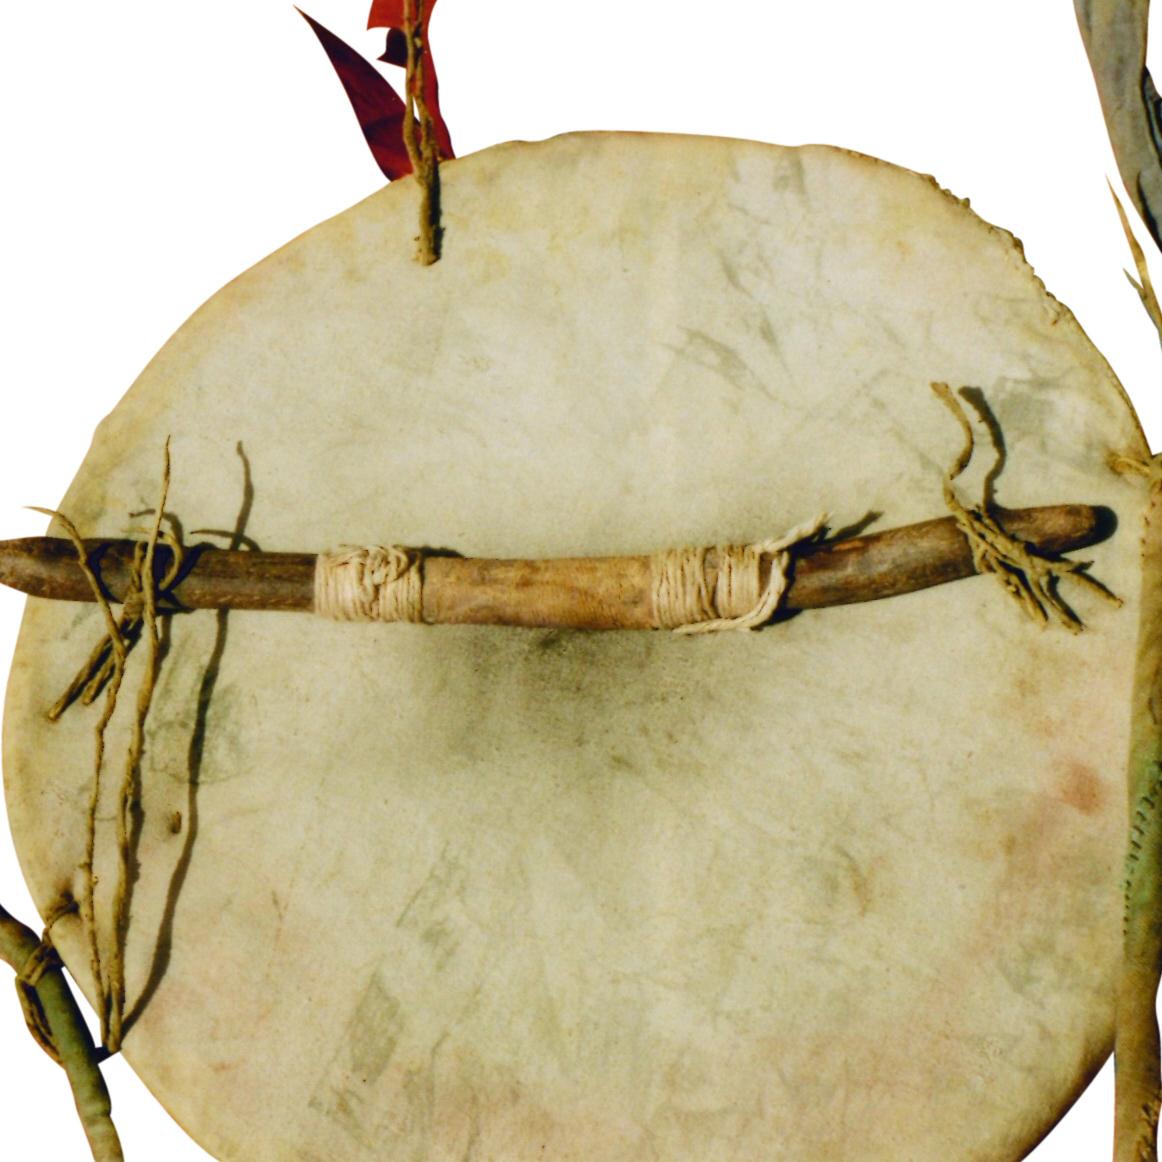 Muslin shield with backhand hold, bundle sticks with red and yellow ochre and original shoulder carrying strap. Ex Kammerer

Period: 19th Century

Origin: Sioux, Plains

Size: 16 1/2